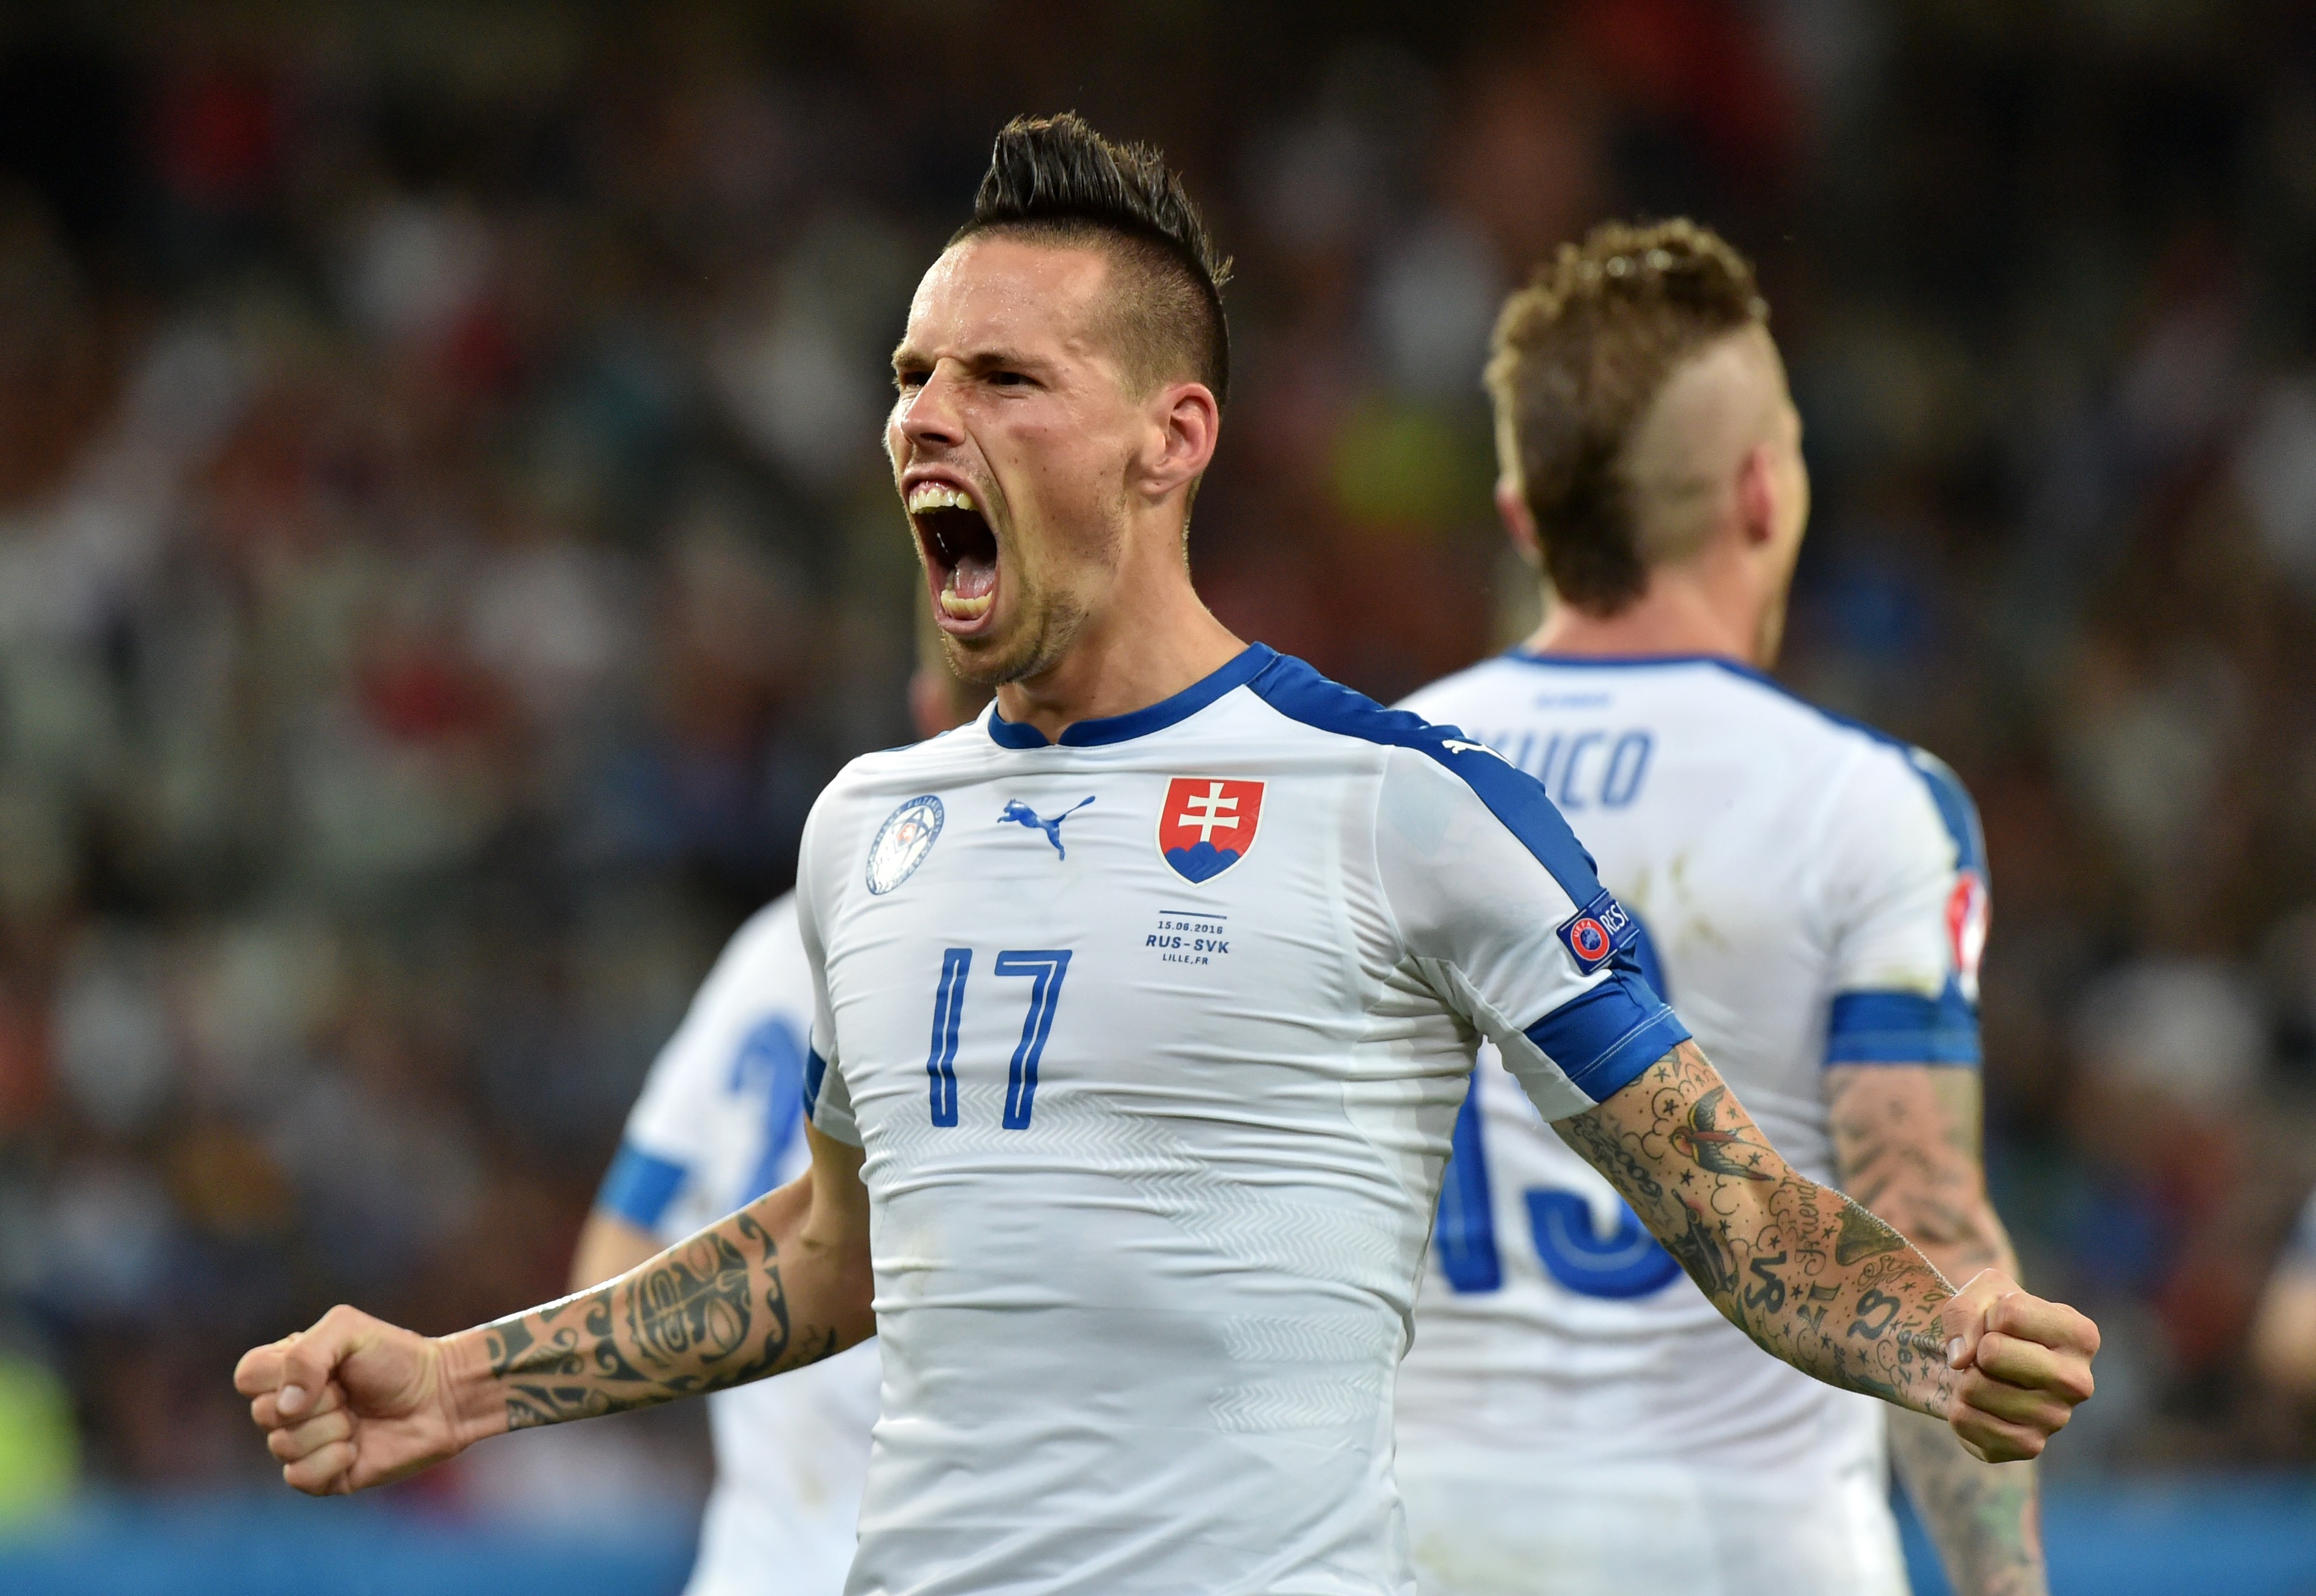 Slovakia's midfielder Marek Hamsik celebrates his goal during the Euro 2016 group B football match between Russia and Slovakia at the Pierre-Mauroy Stadium in Villeneuve-d'Ascq, near Lille, on June 15, 2016